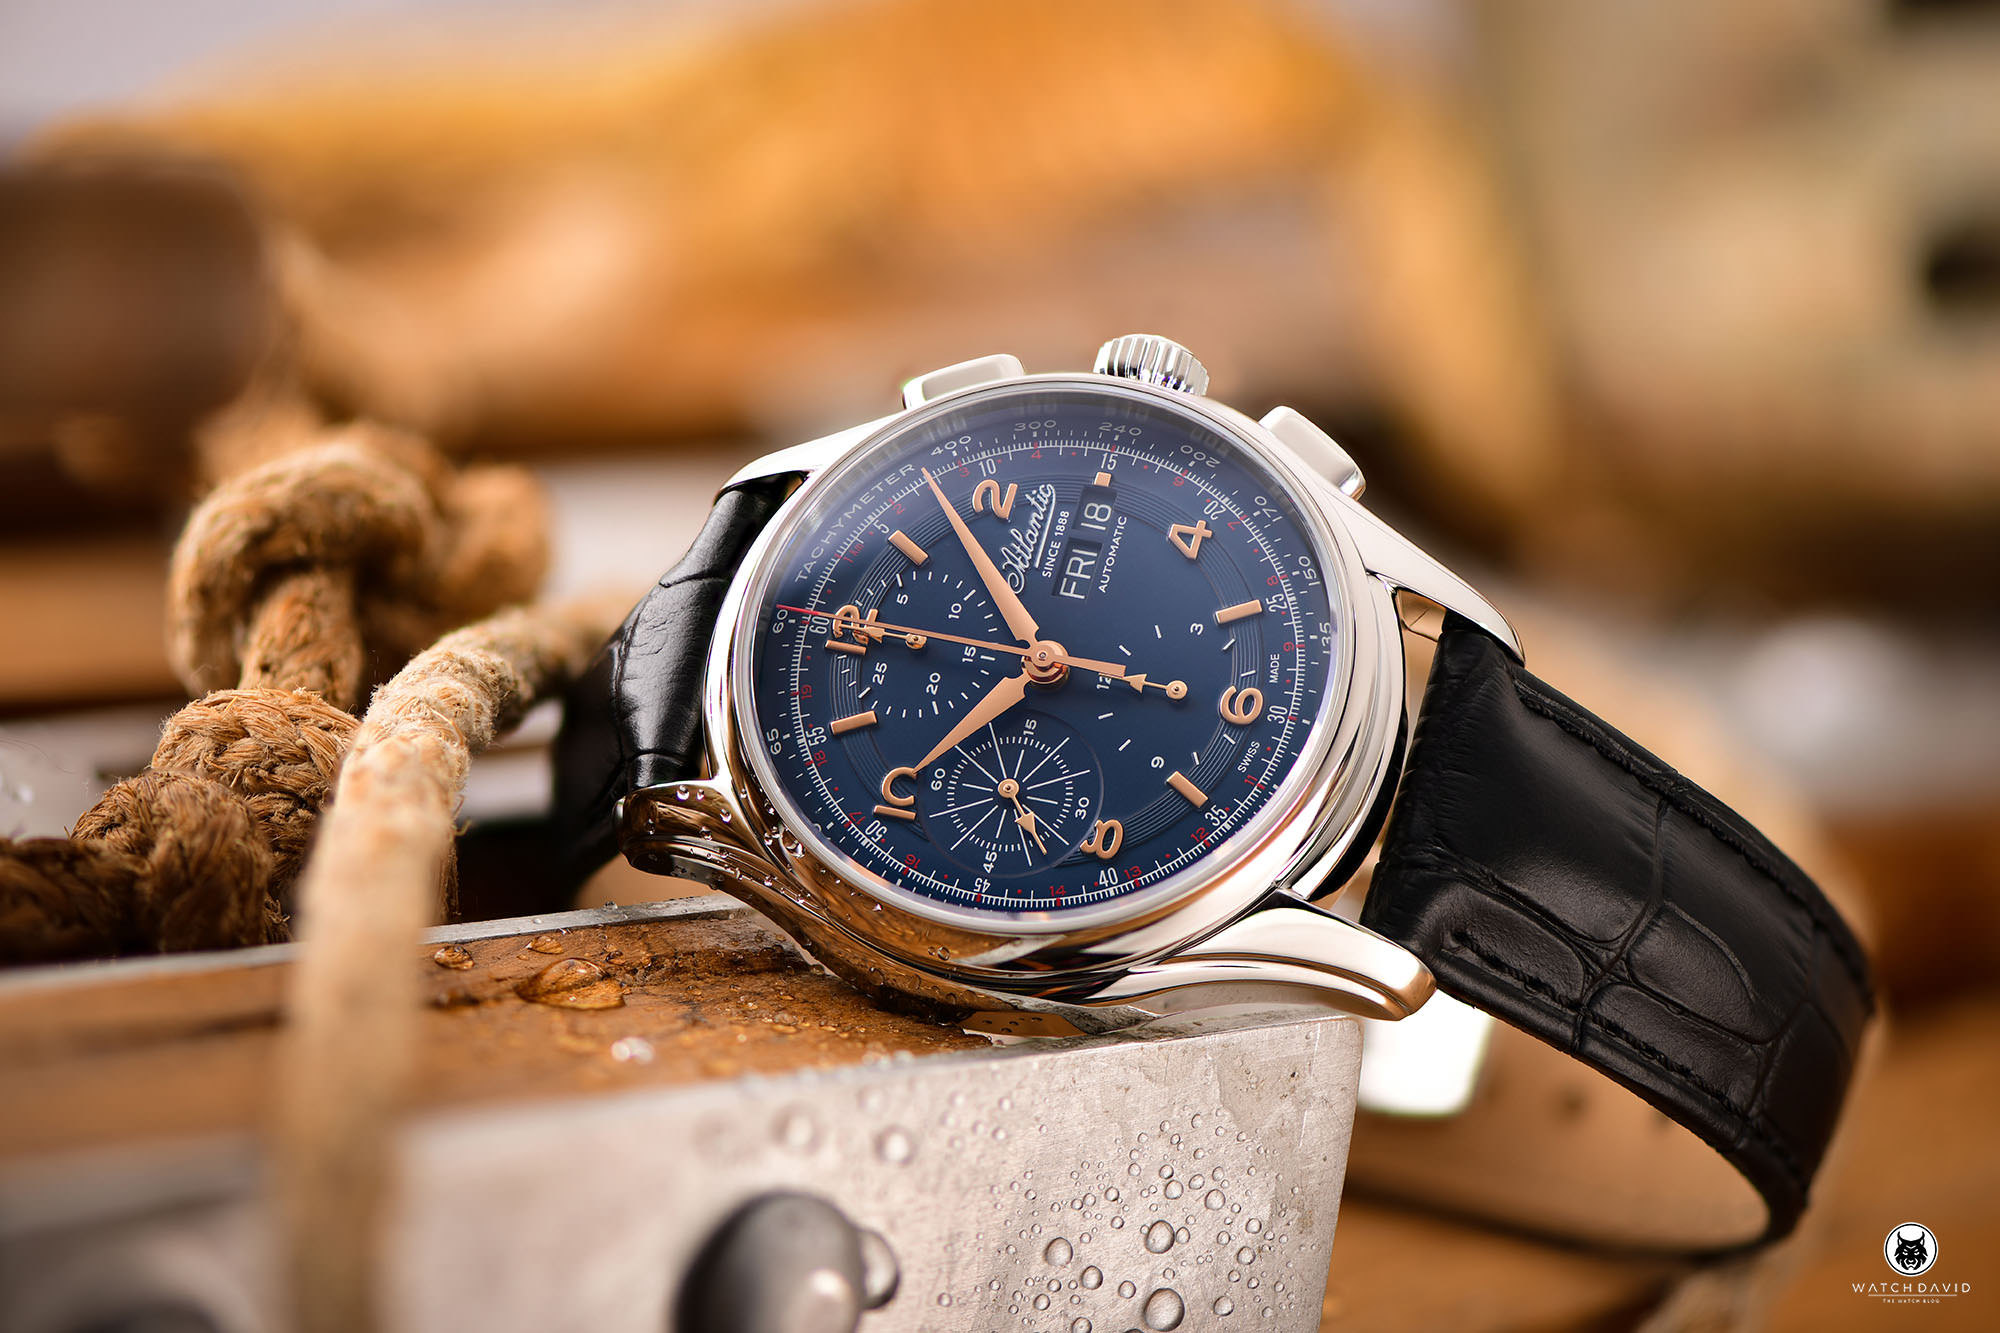 Atlantic Worldmaster 1888 Automatic Chronograph Day Date Review